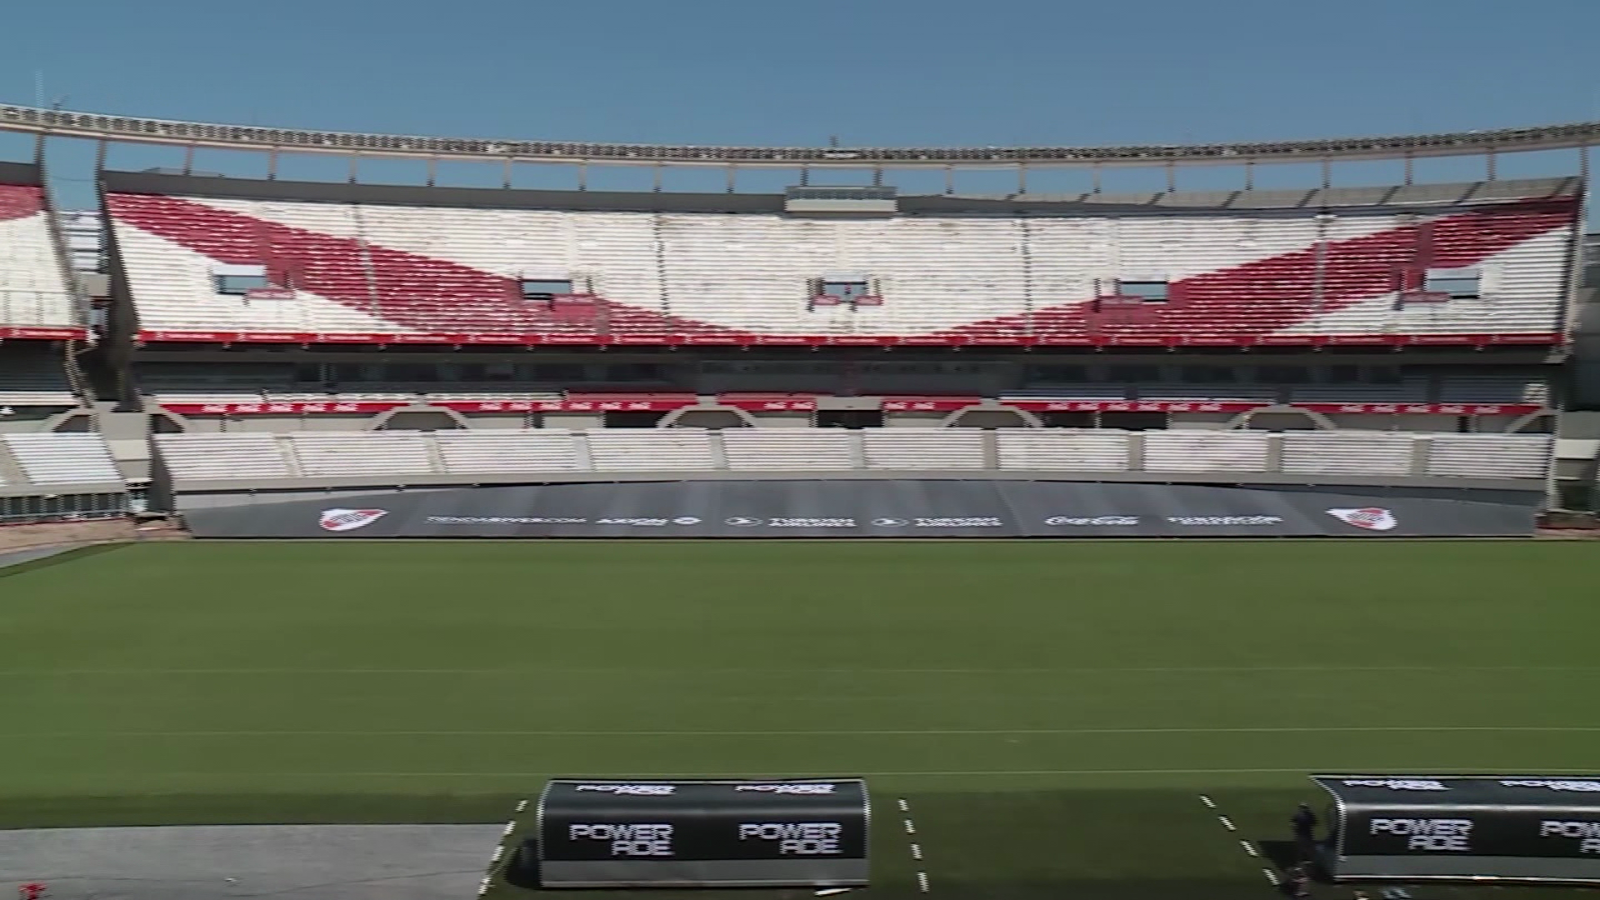 River Plate opens its renovated Monumental on Saturday